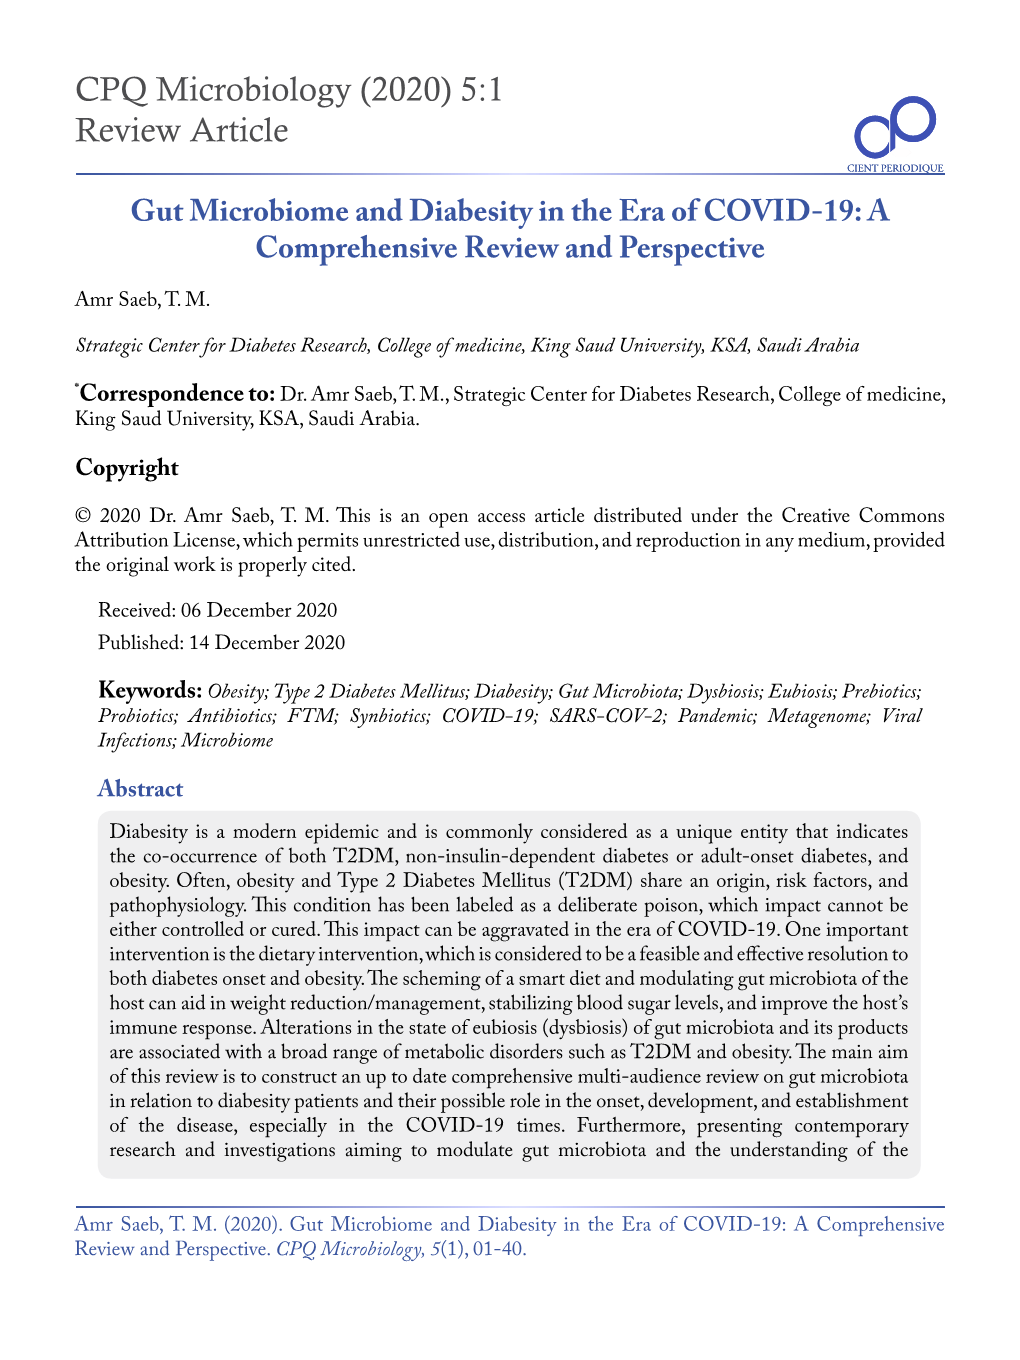 Gut Microbiome and Diabesity in the Era of COVID-19: a Comprehensive Review and Perspective